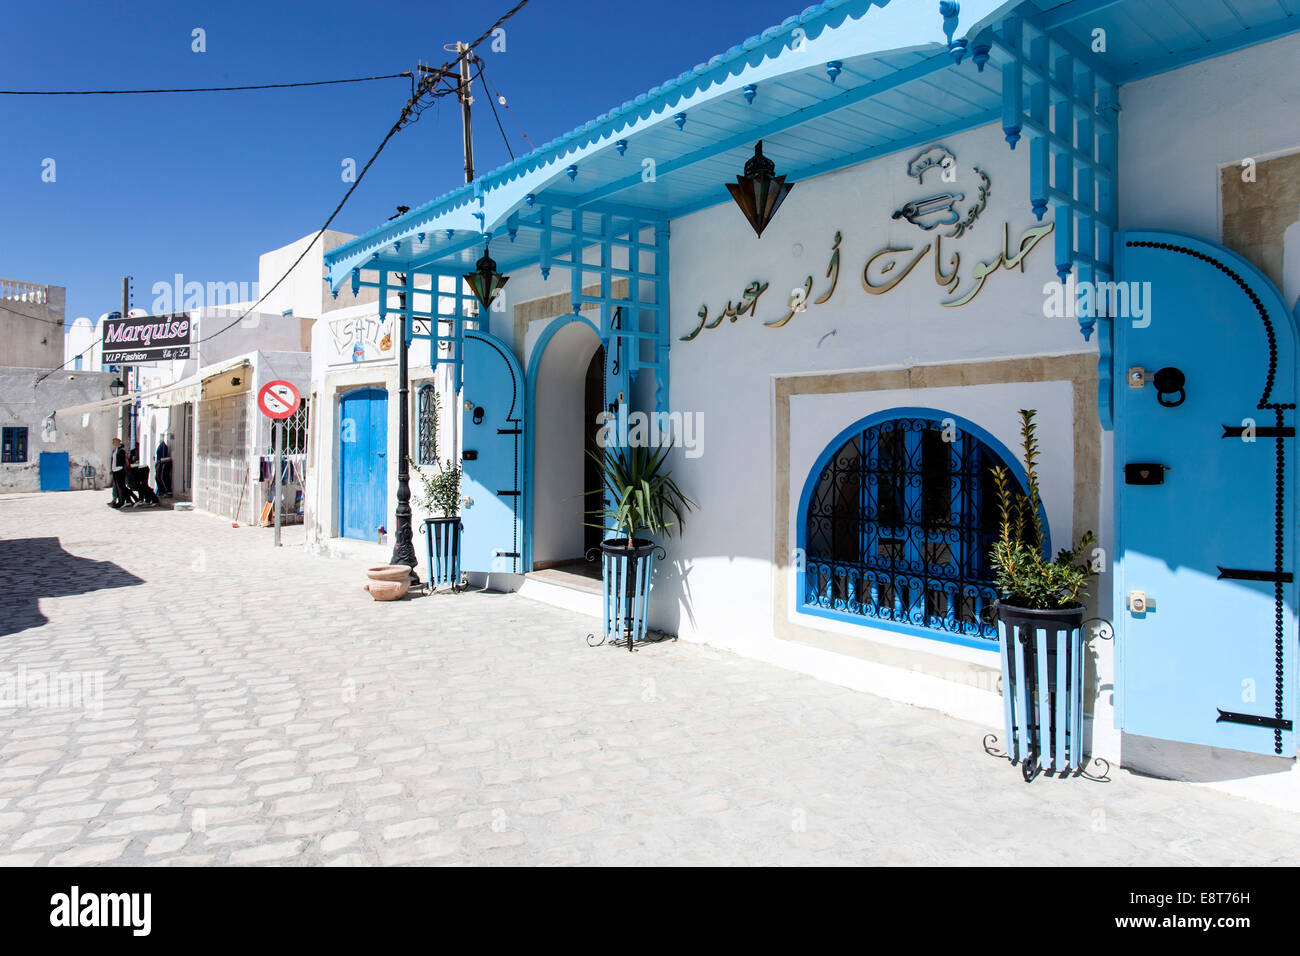 Alley in the town of Houmt Souk, Djerba, Tunisia Stock Photo